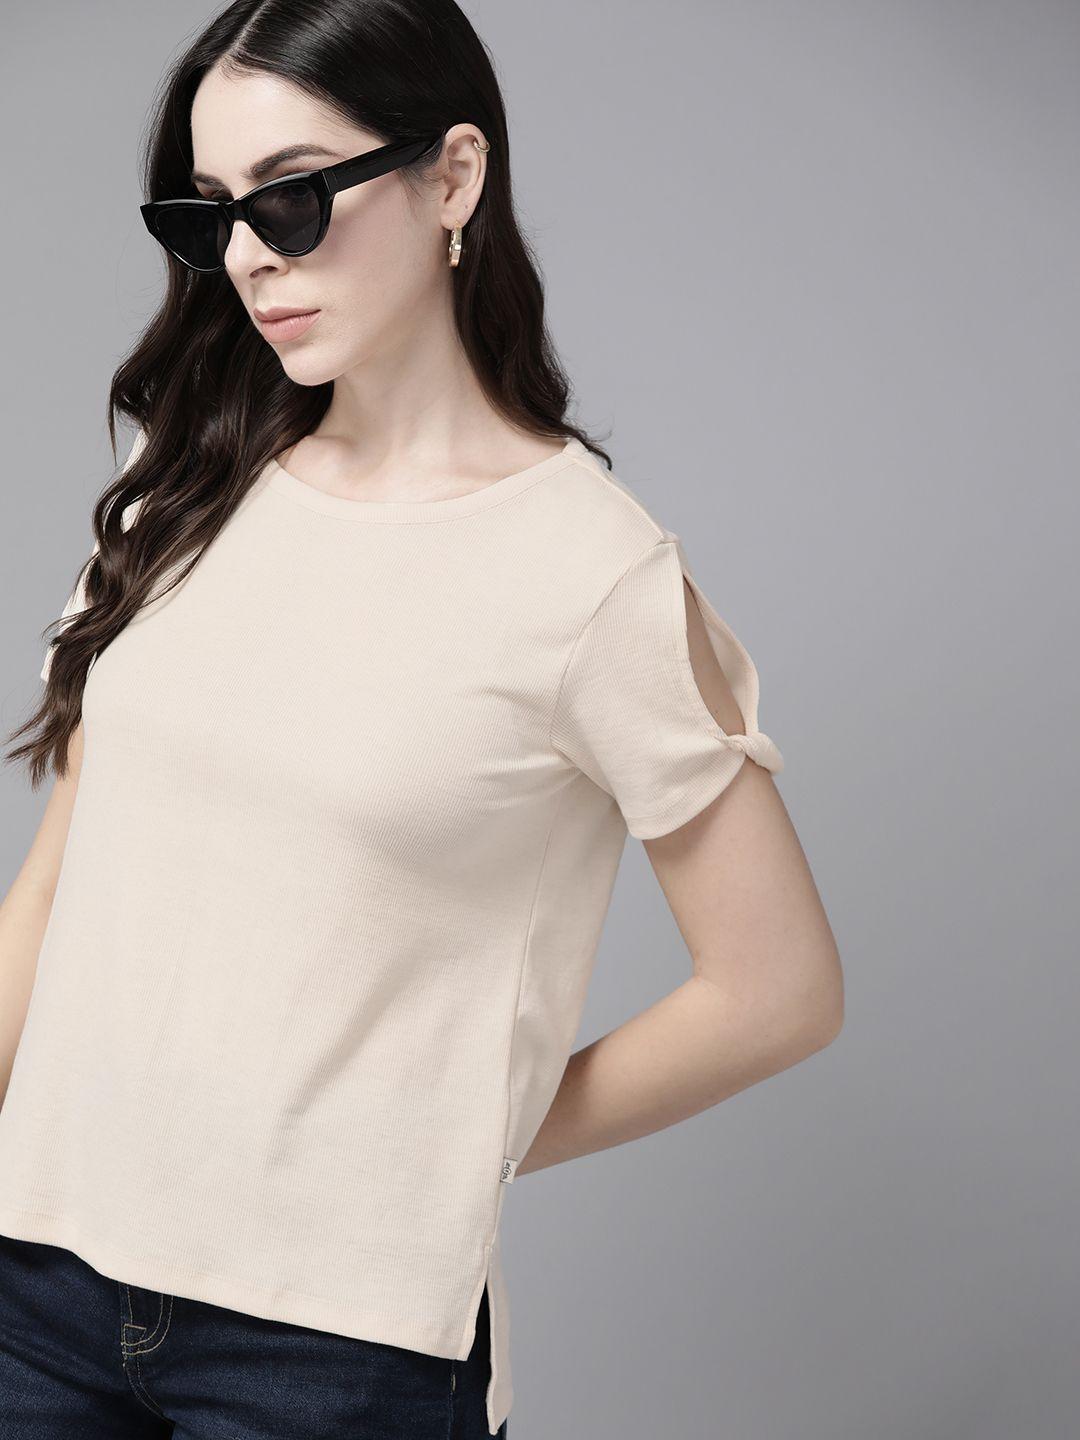 the roadster lifestyle co. cotton cut-out detail ribbed t-shirt